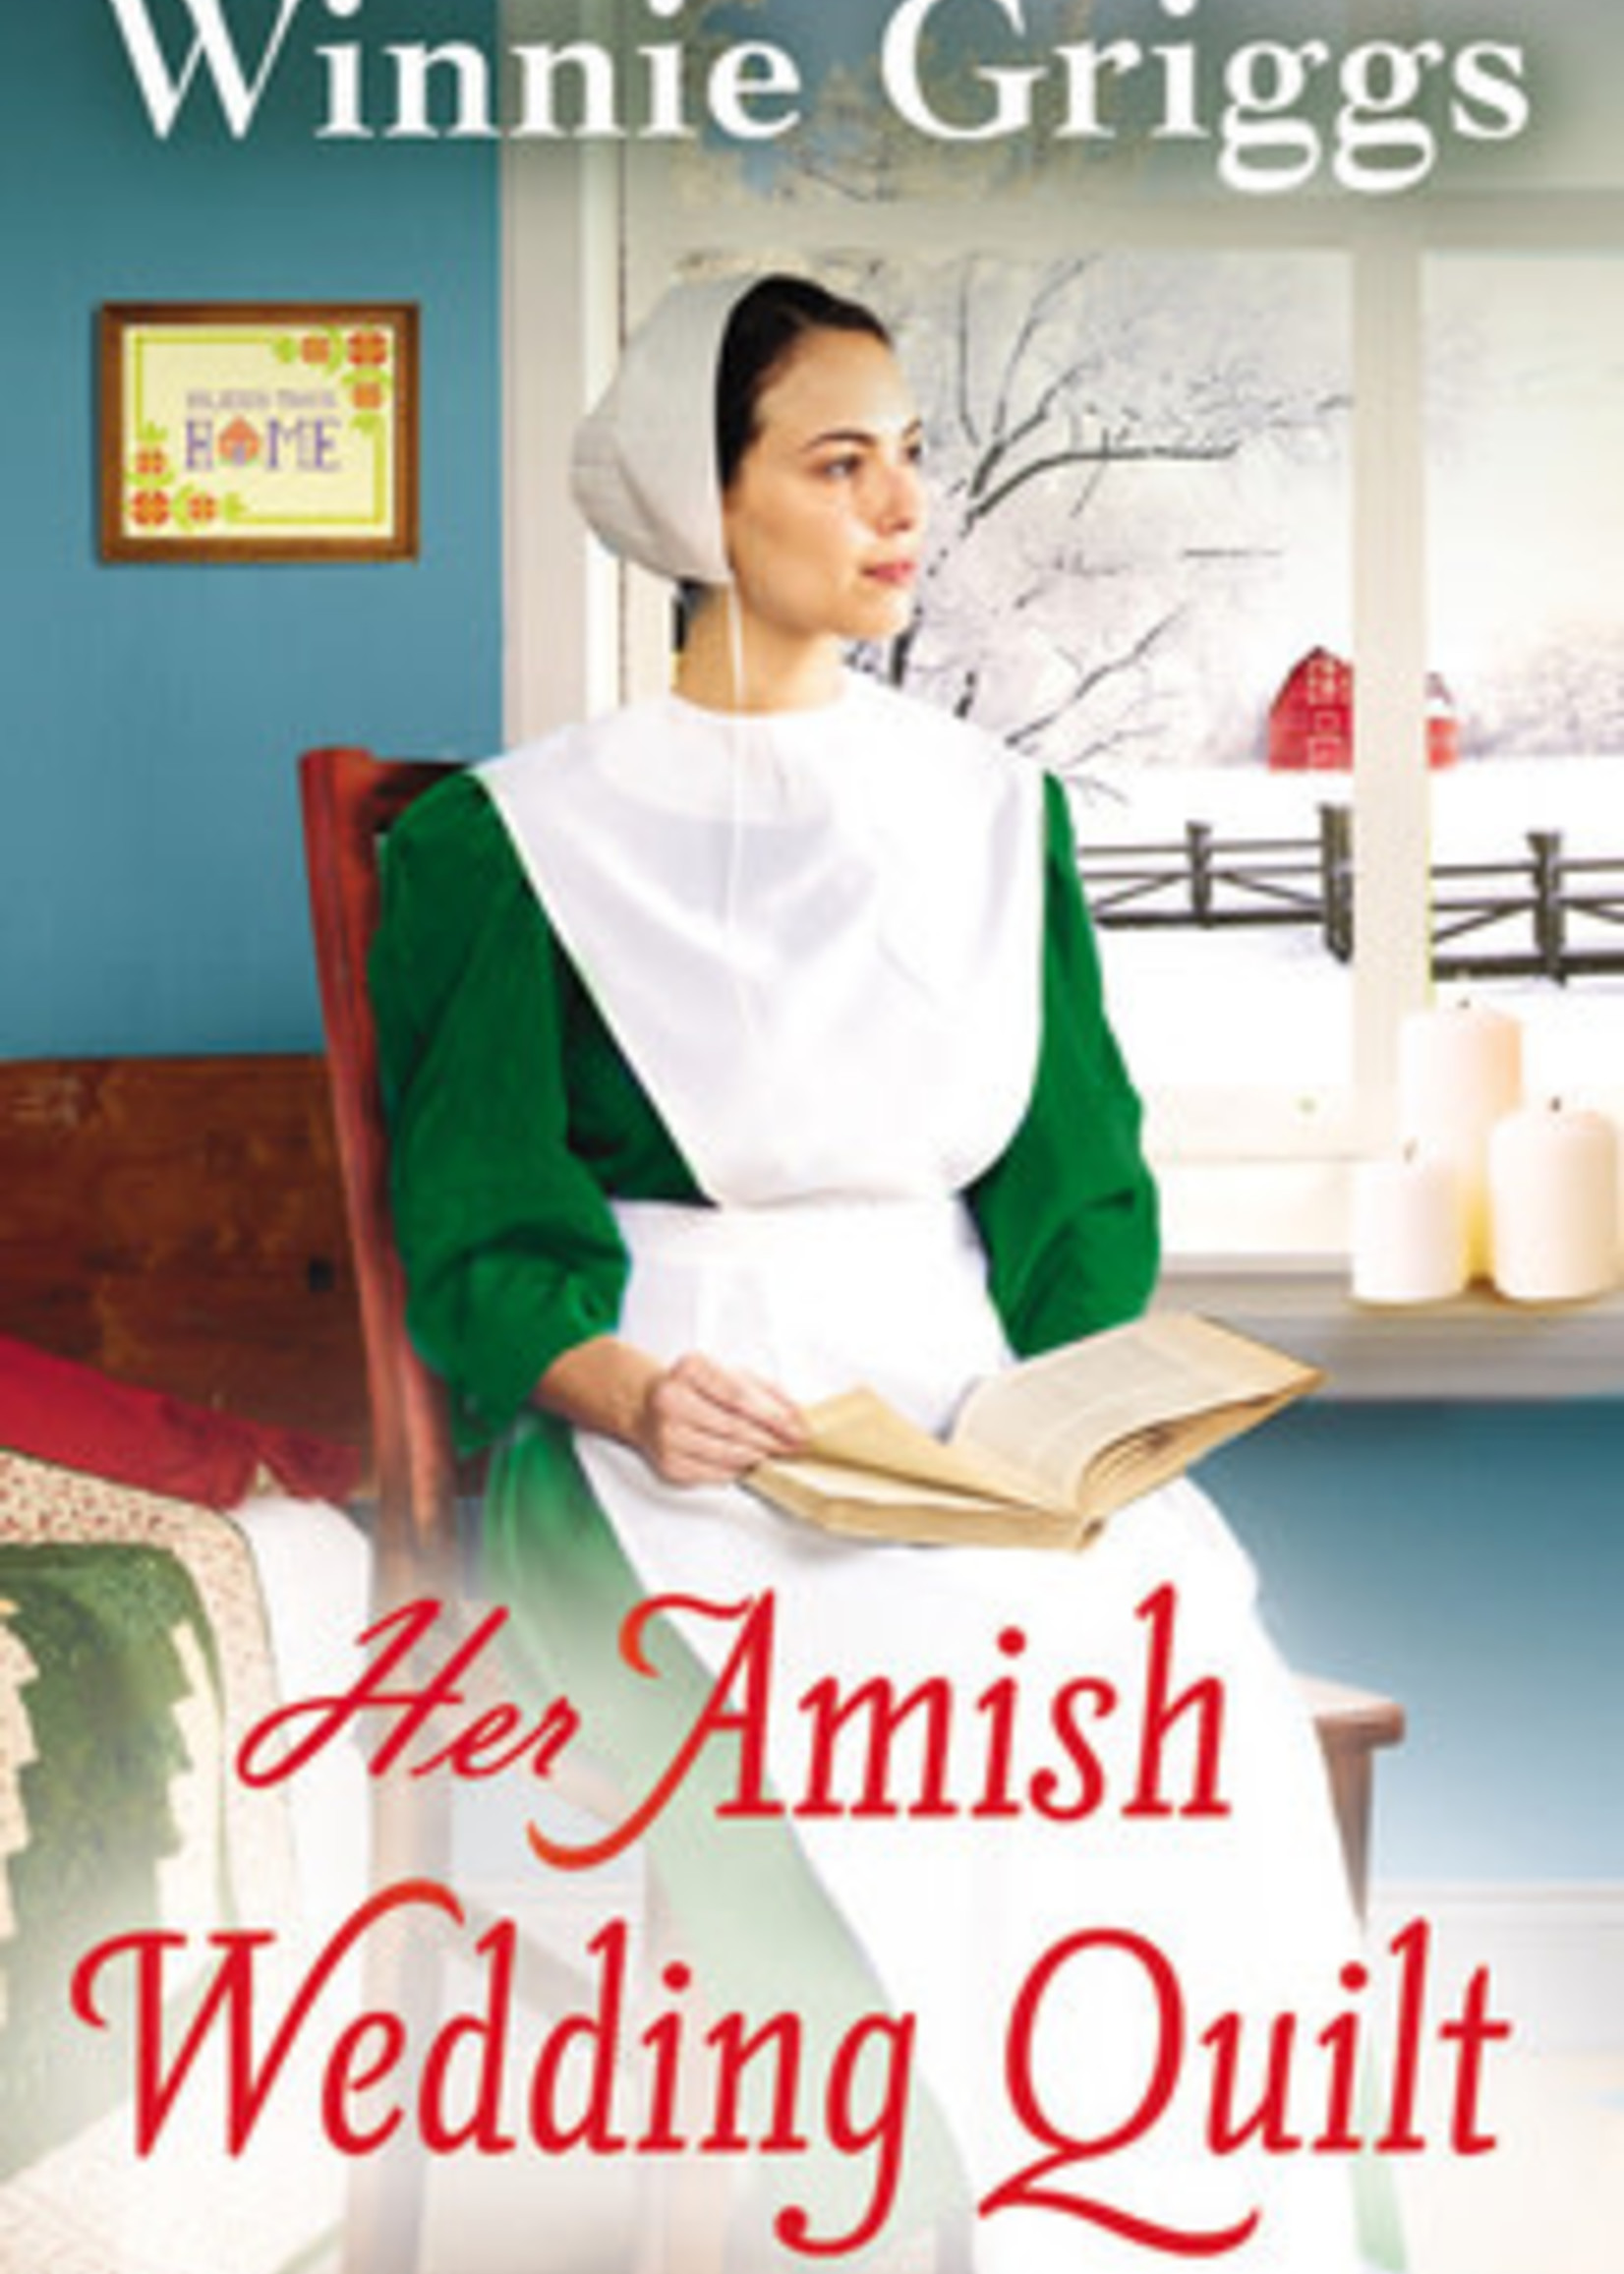 Her Amish Wedding Quilt (Hope's Haven #1) by Winnie Griggs